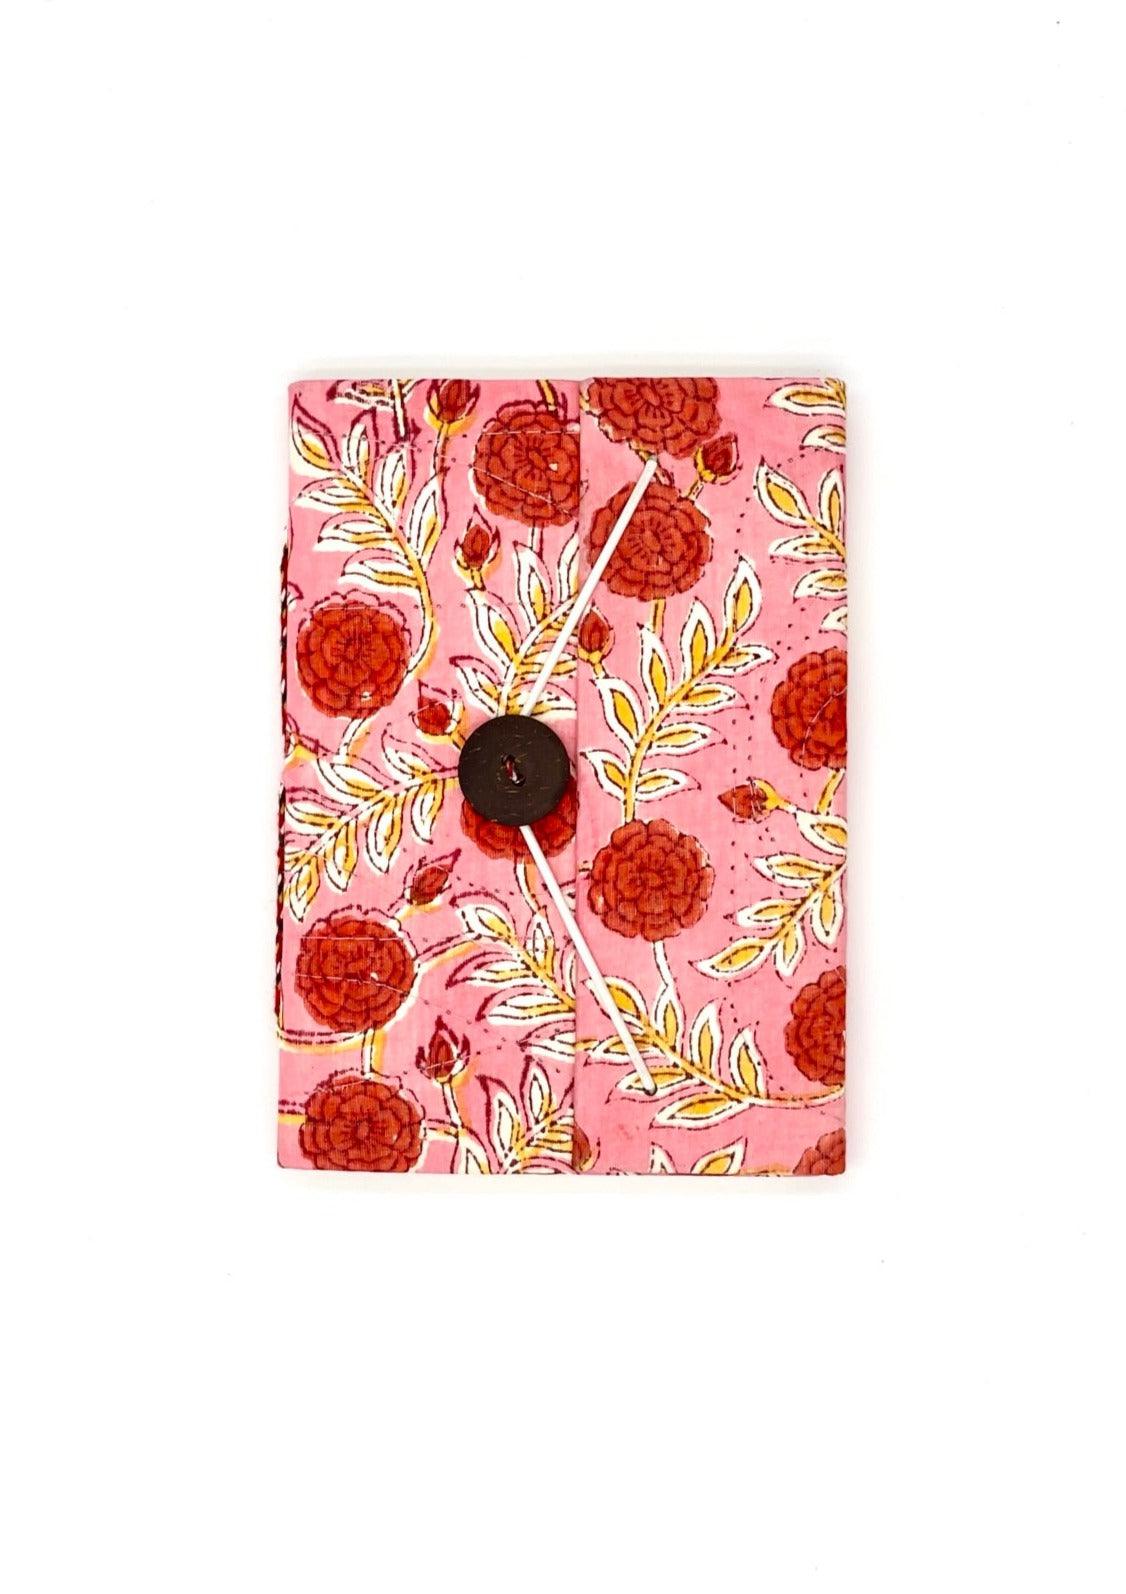 Block Print Journal/Notebook, Pink Dahlia Floral - Unlined, 100 Pages, Thick Paper, Hard Cover - Transcend